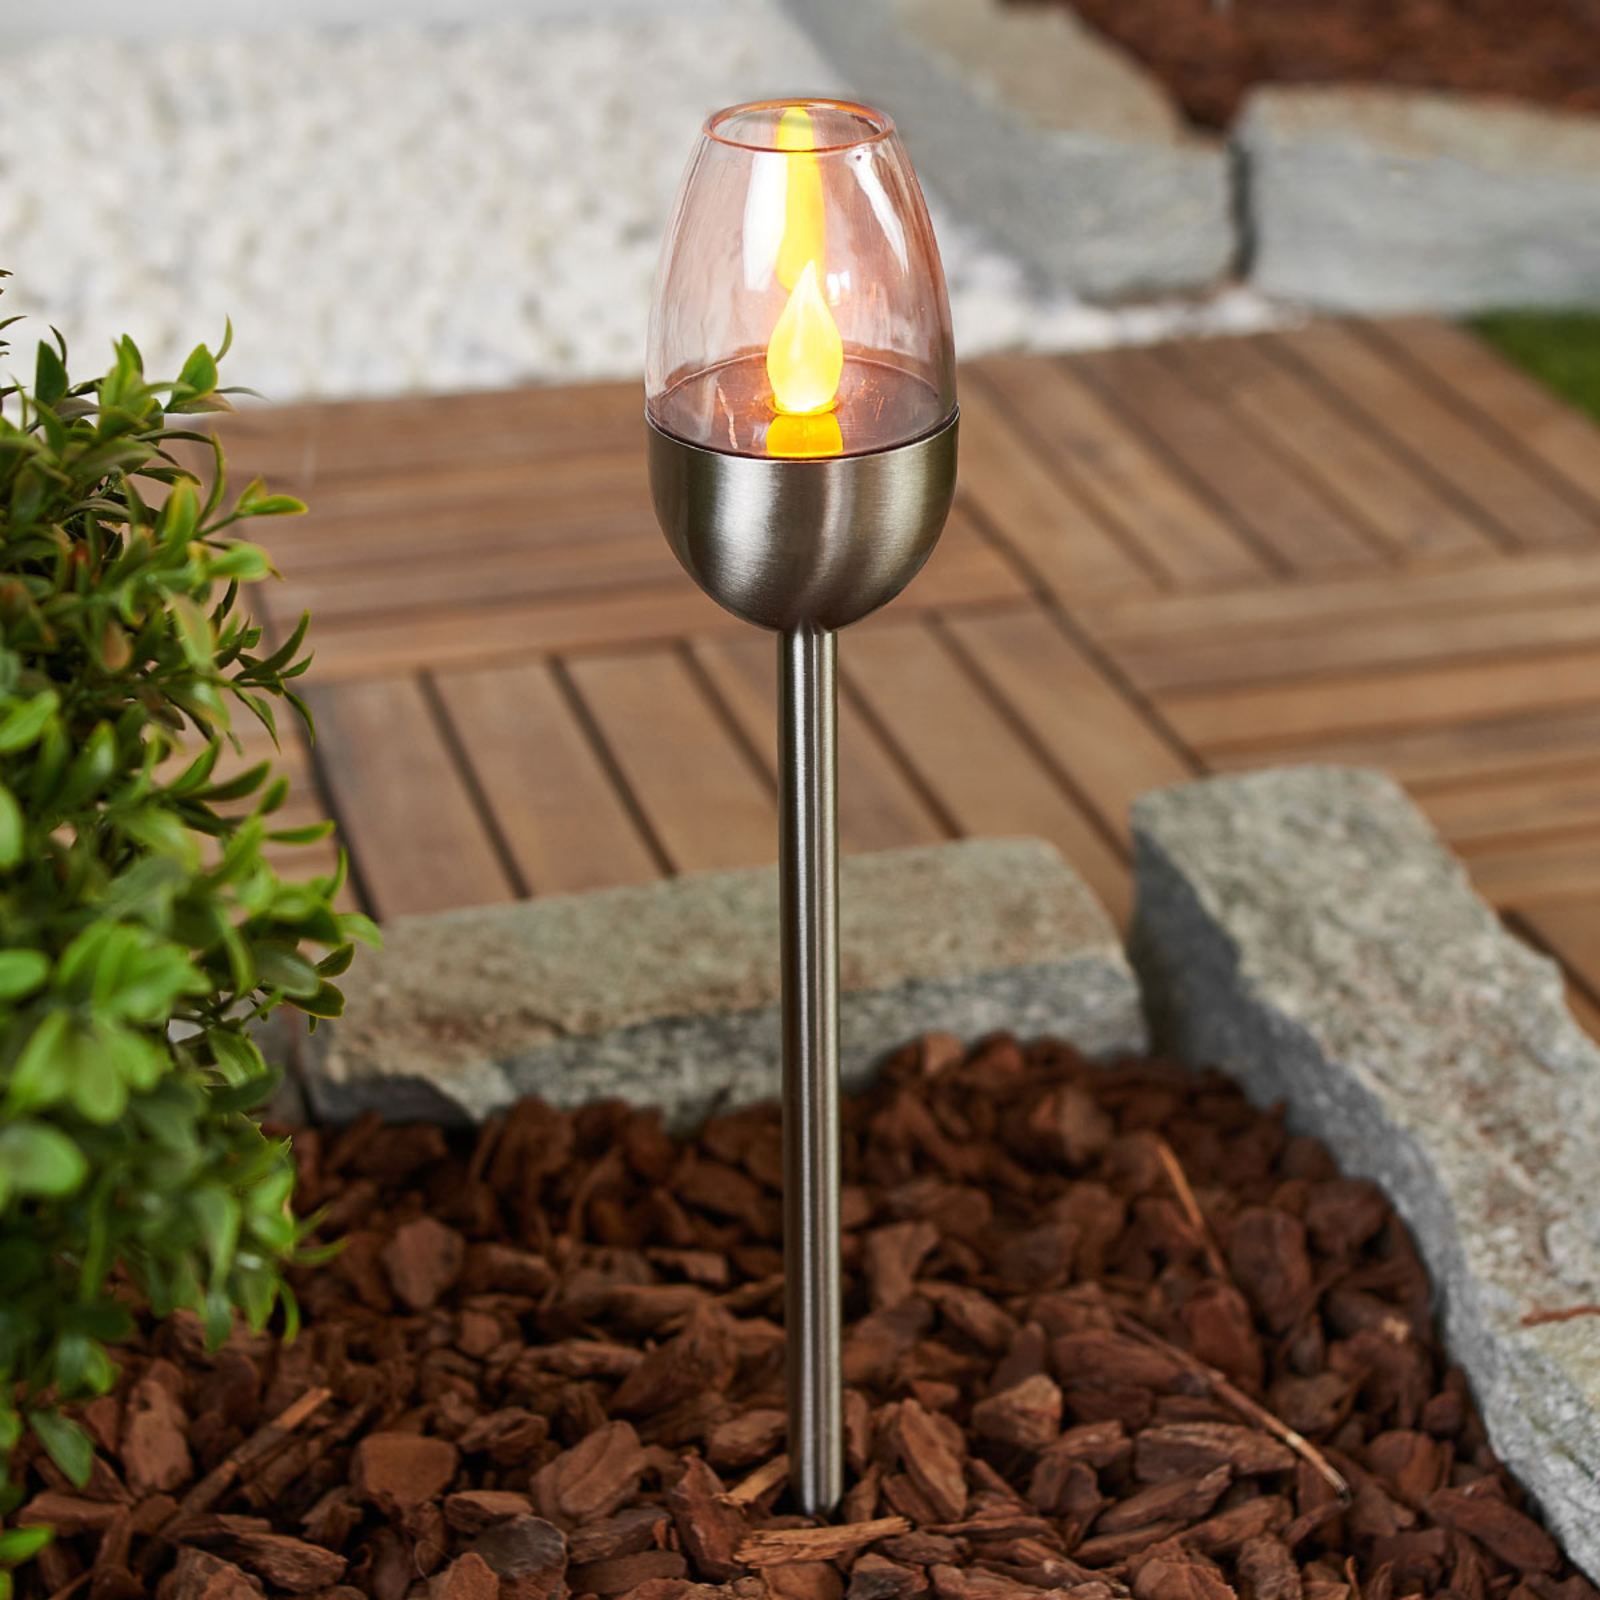 Three Lugin stainless steel LED solar lamps